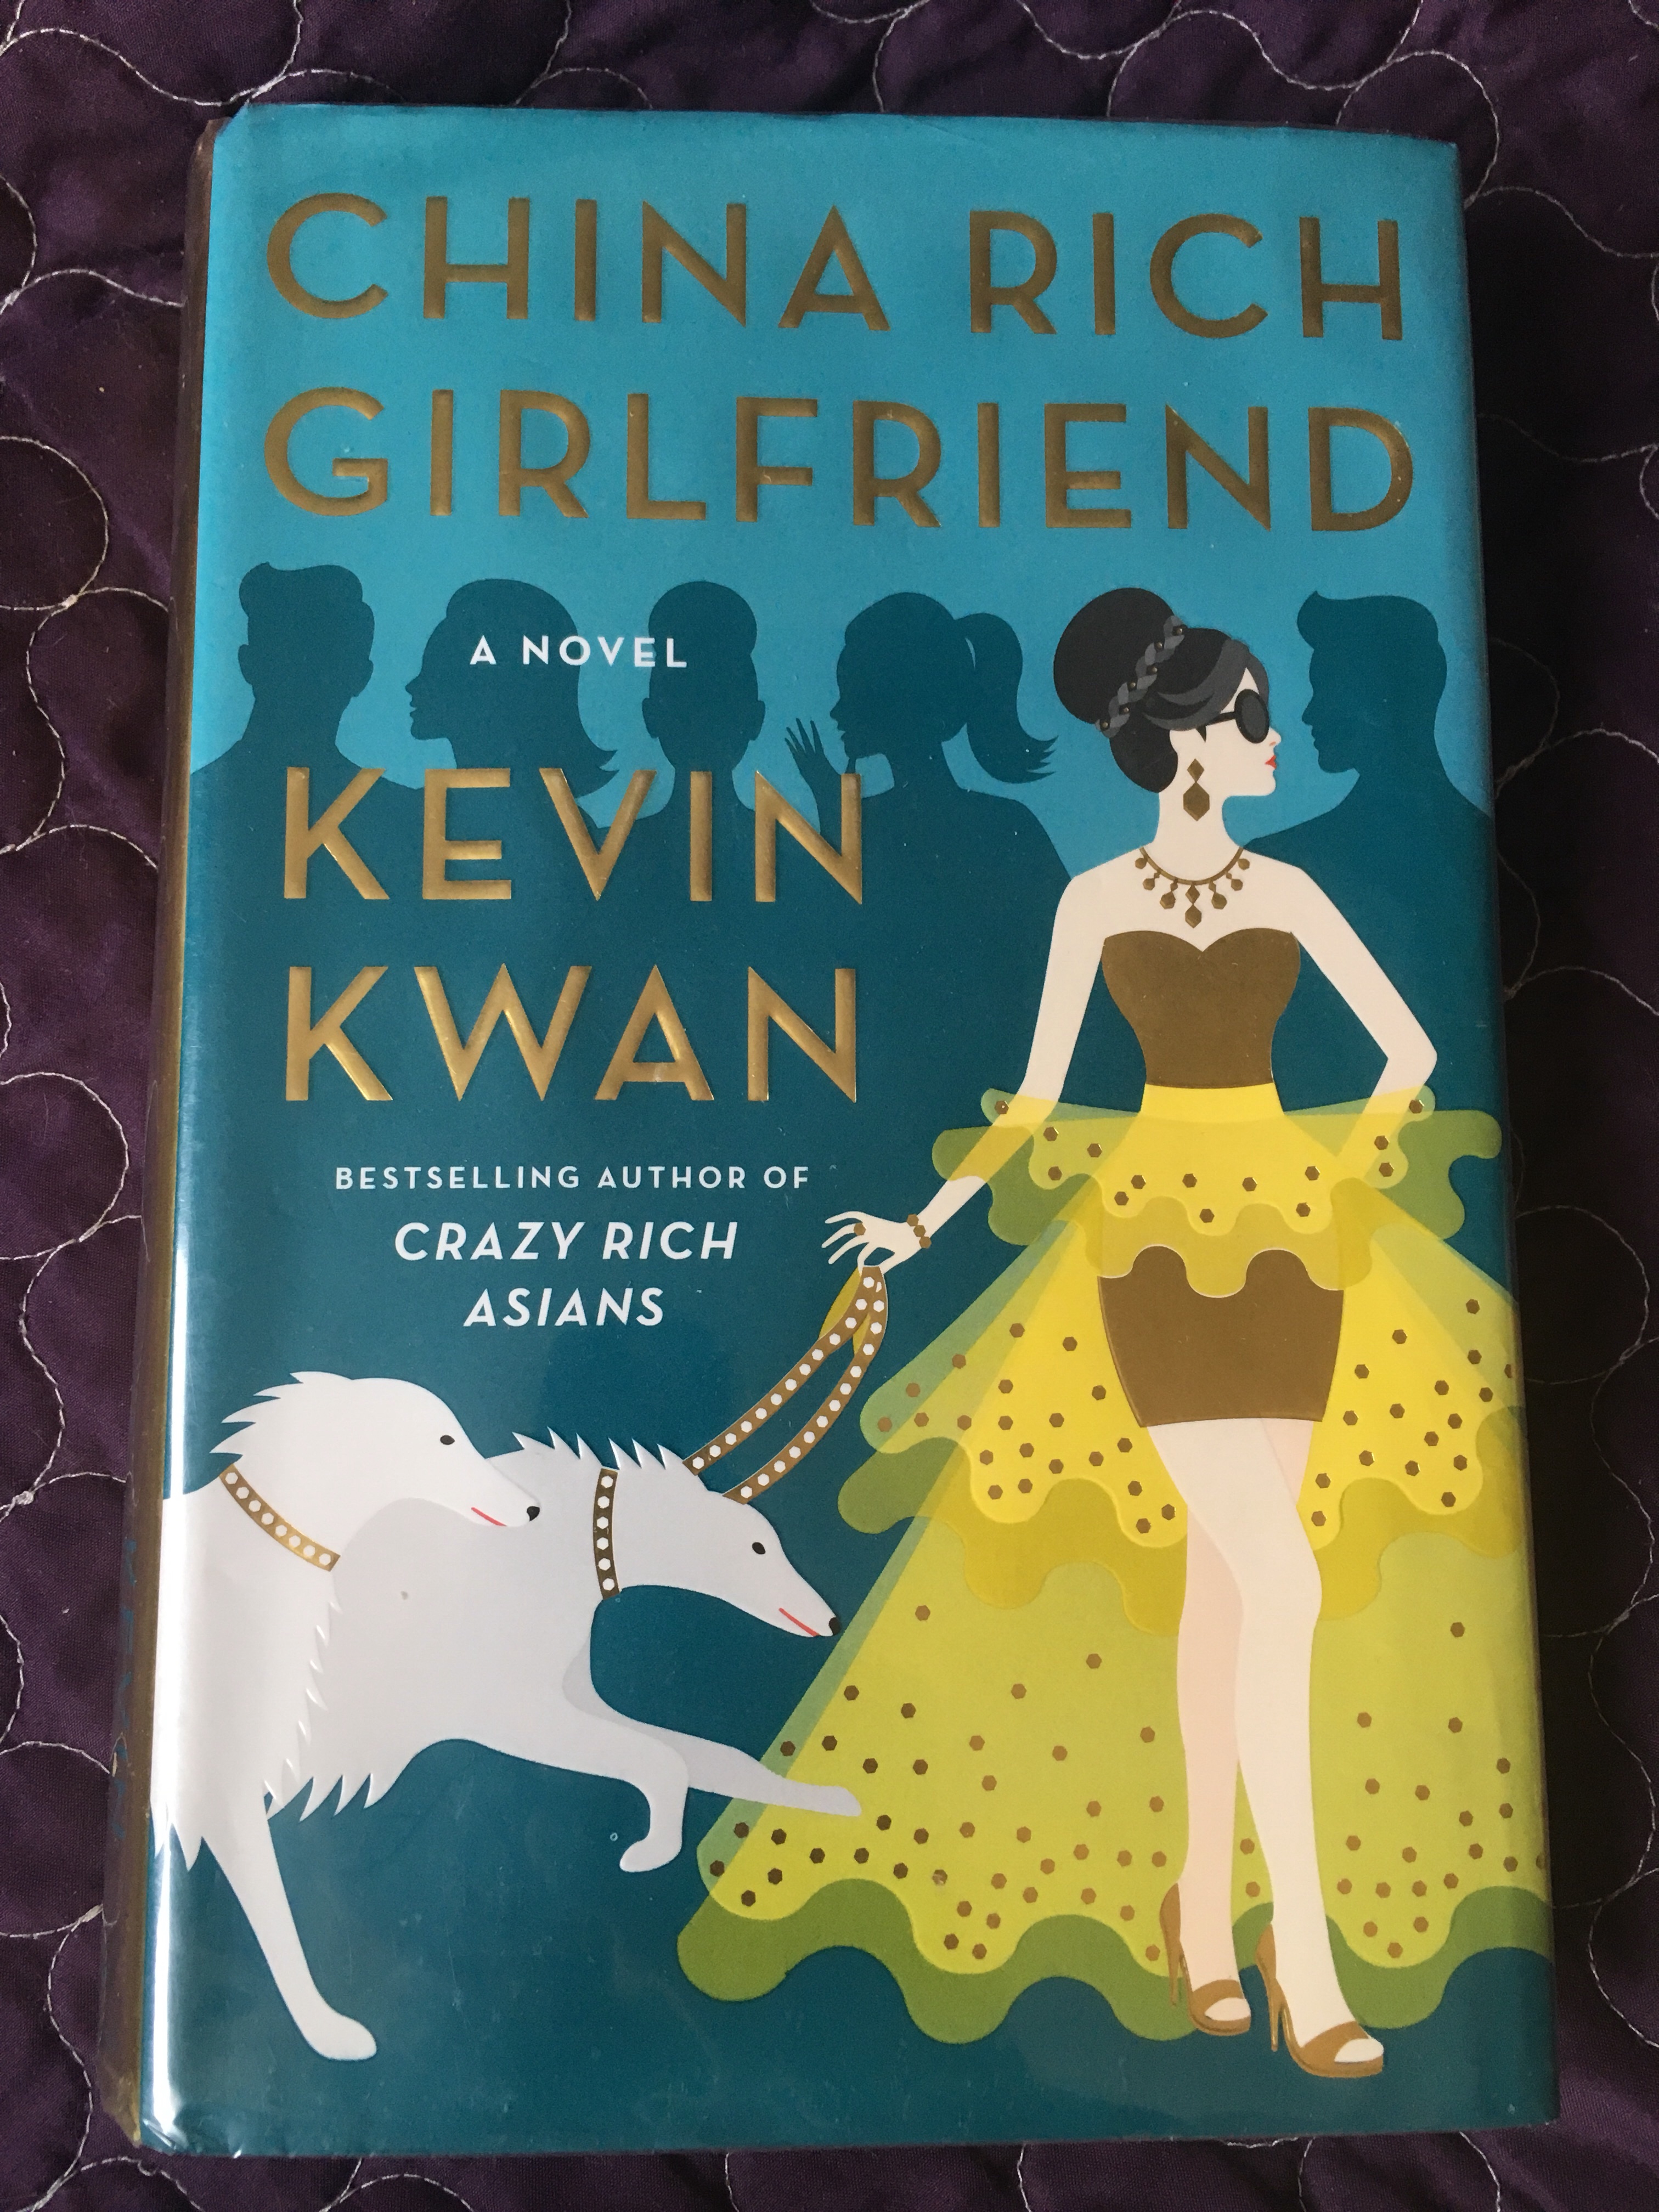 China rich girlfriend by Kevin Kwan book cover